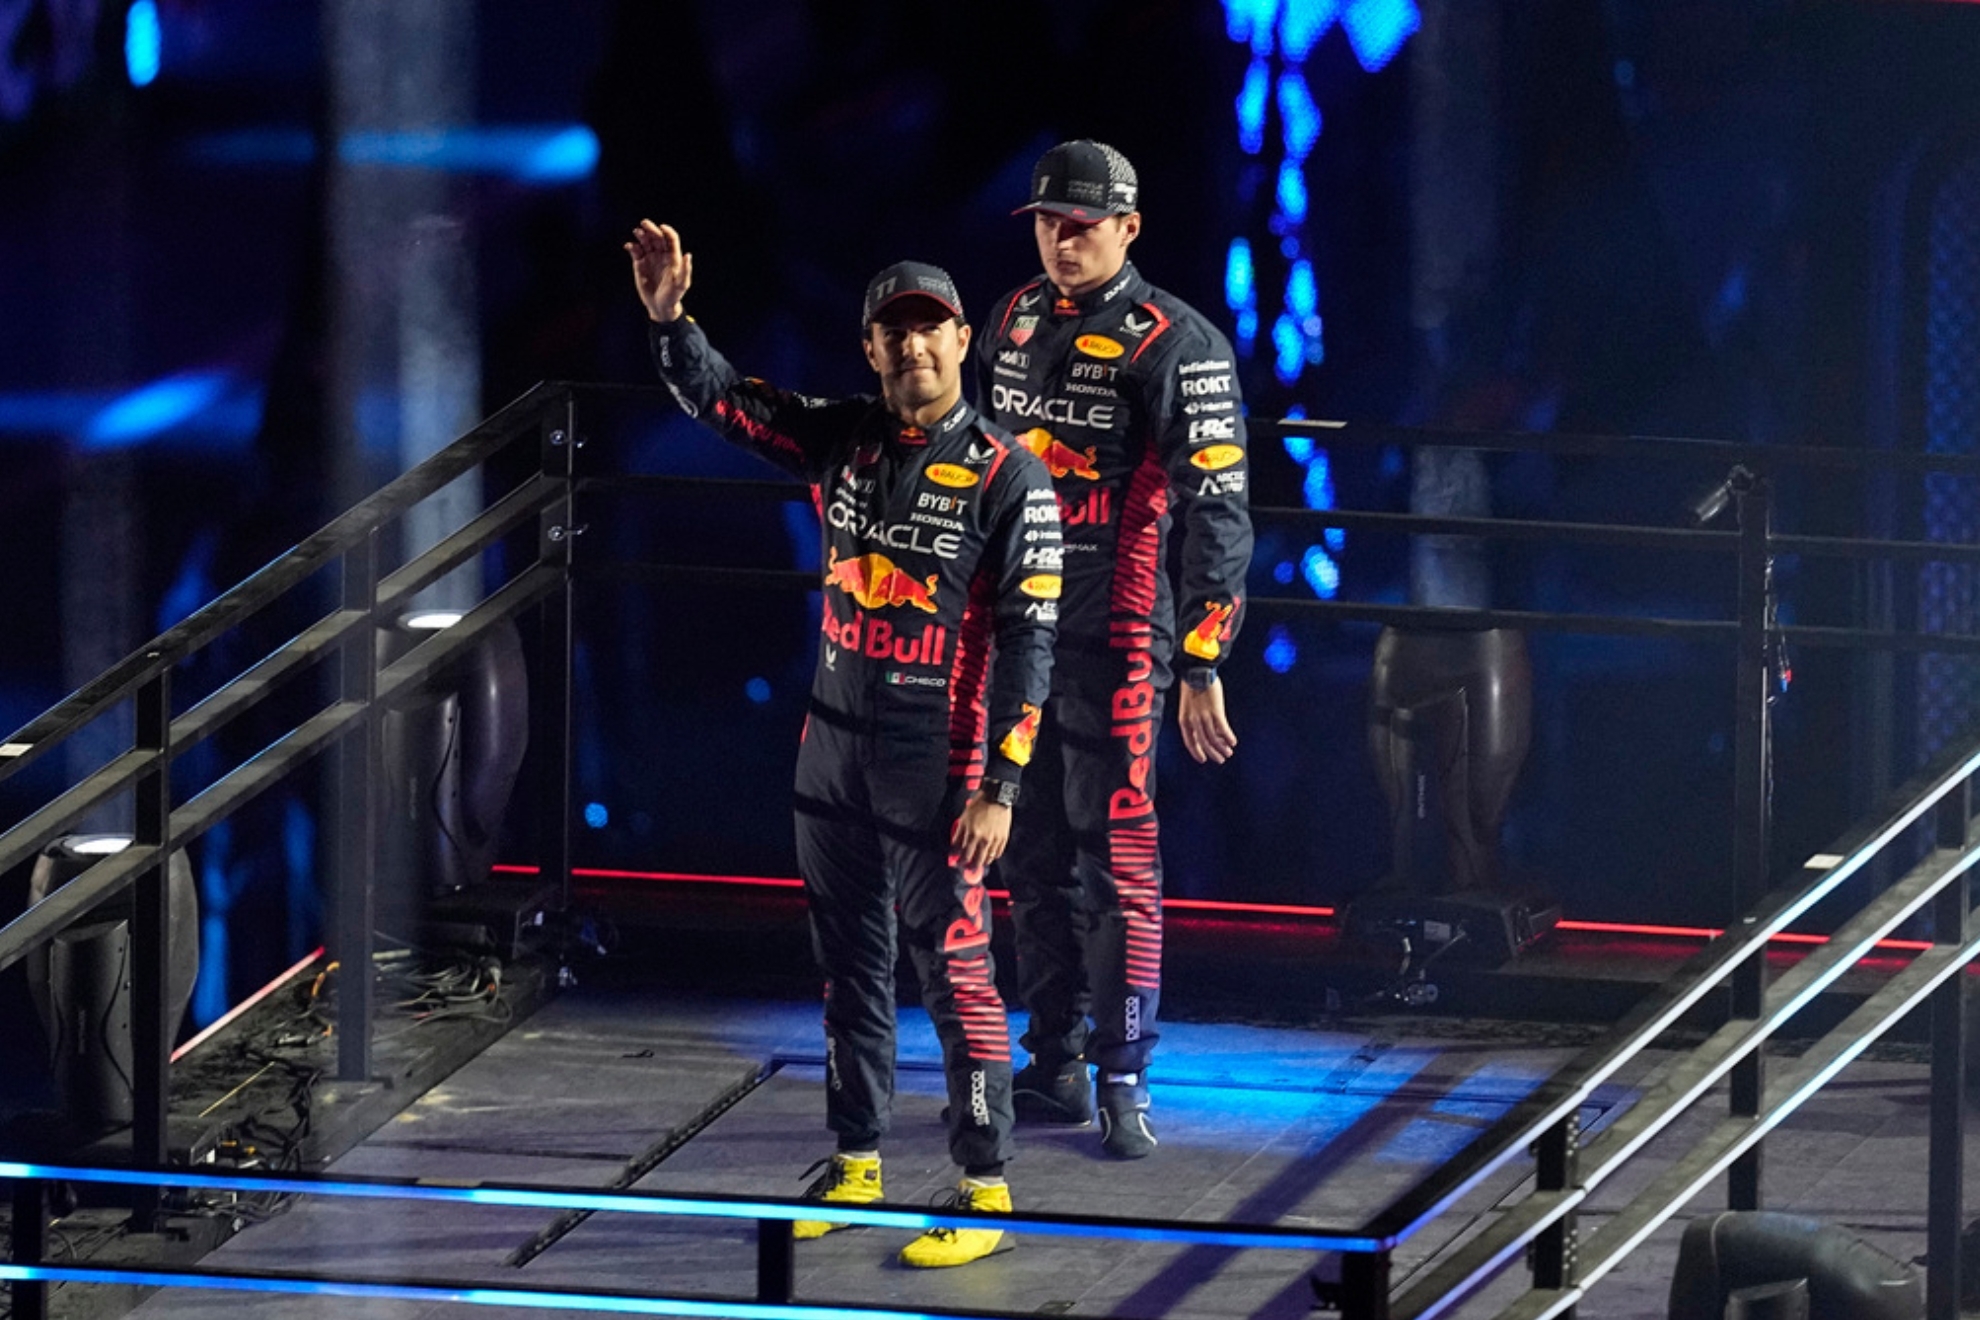 Red Bull driver Sergio Perez, of Mexico, left, and Red Bull driver Max Verstappen, of the Netherlands, motion during an opening ceremony for the Formula One Las Vegas Grand Prix auto race